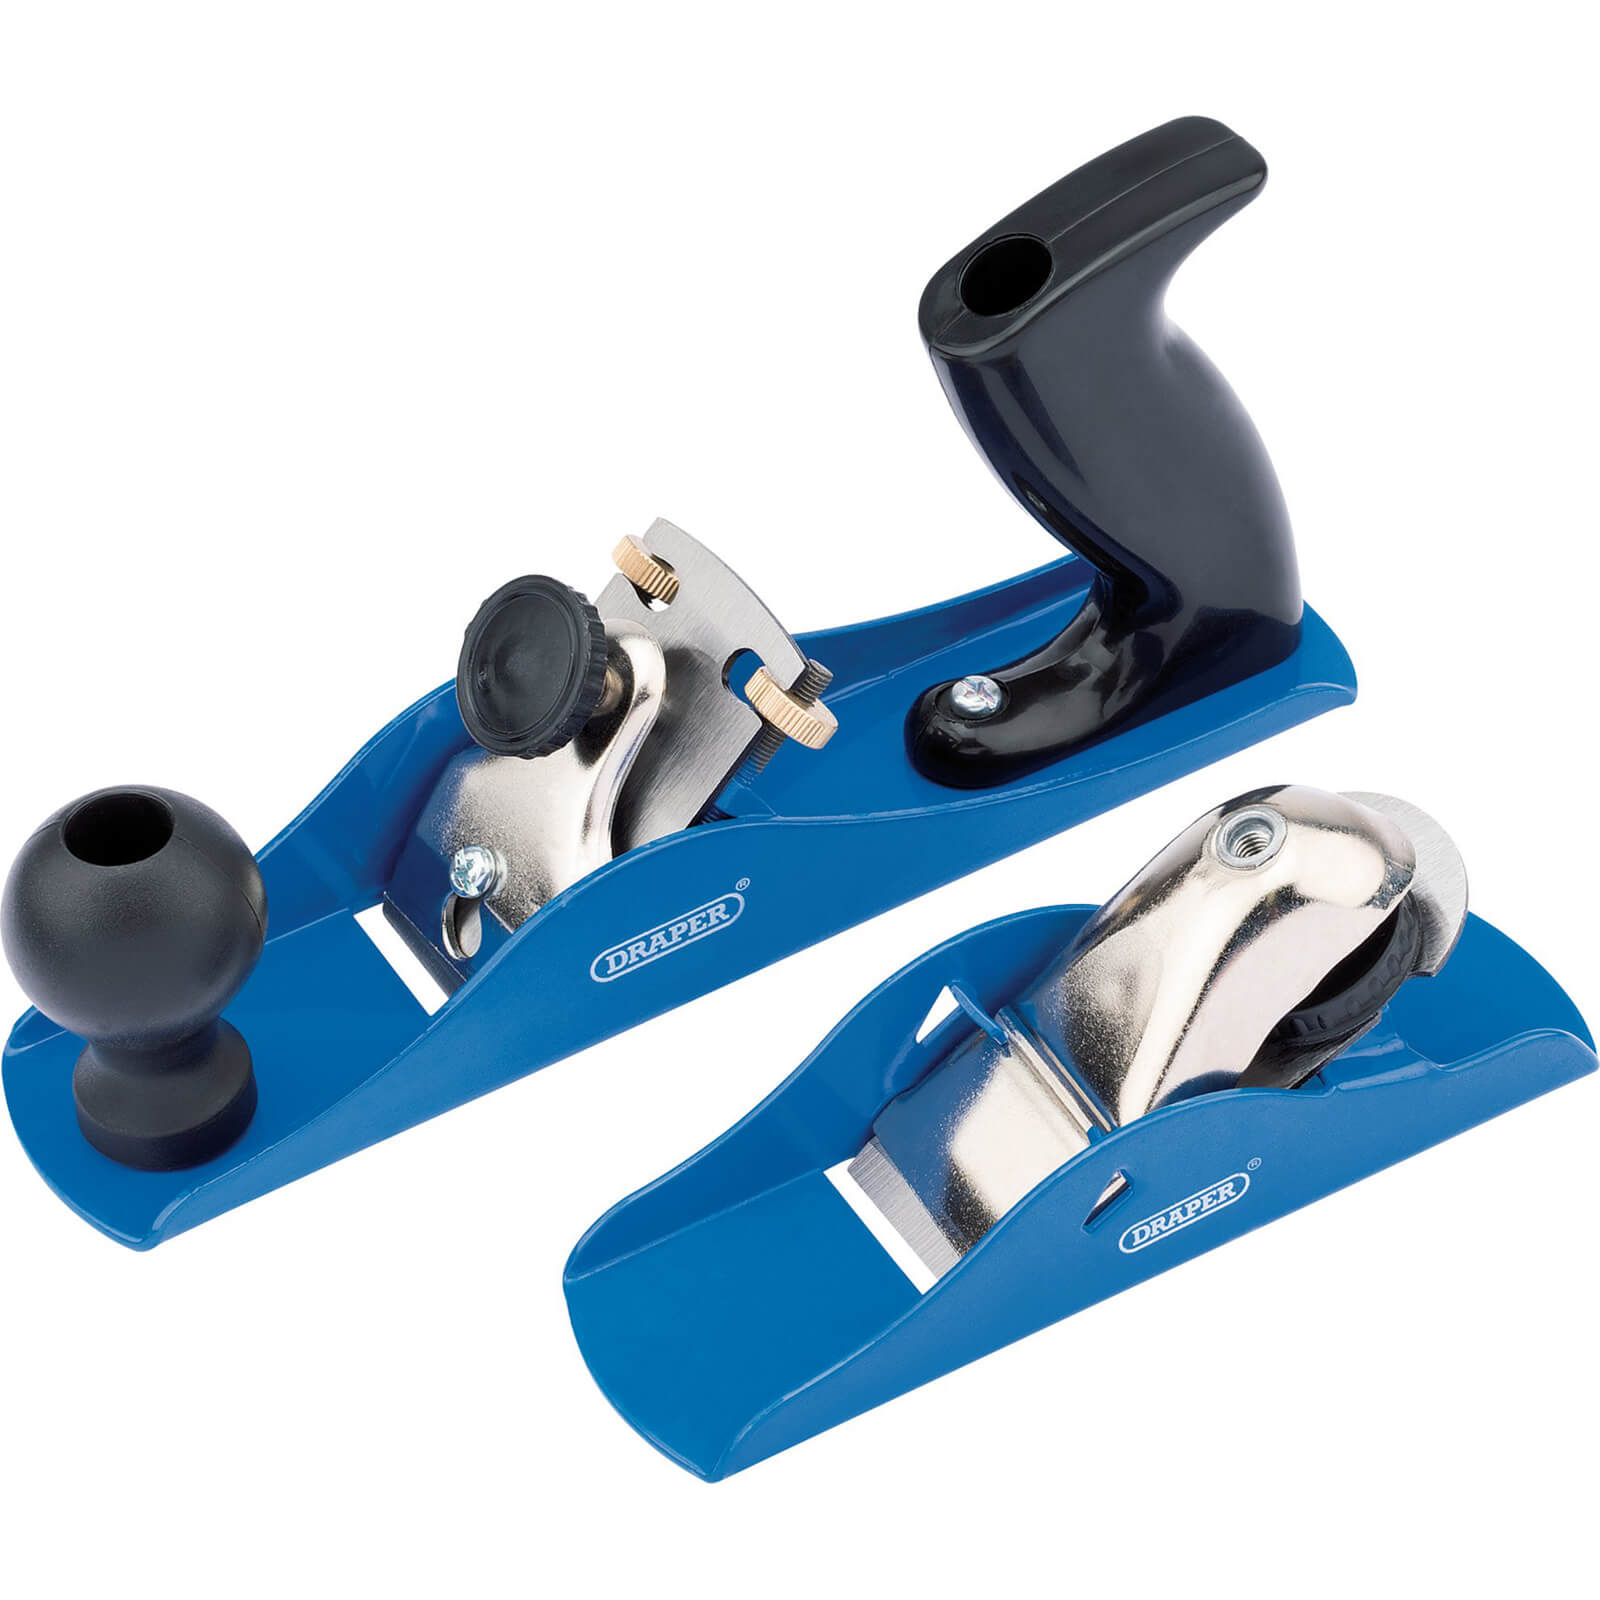 Photo of Draper 2 Piece Block And Smoothing Plane Set